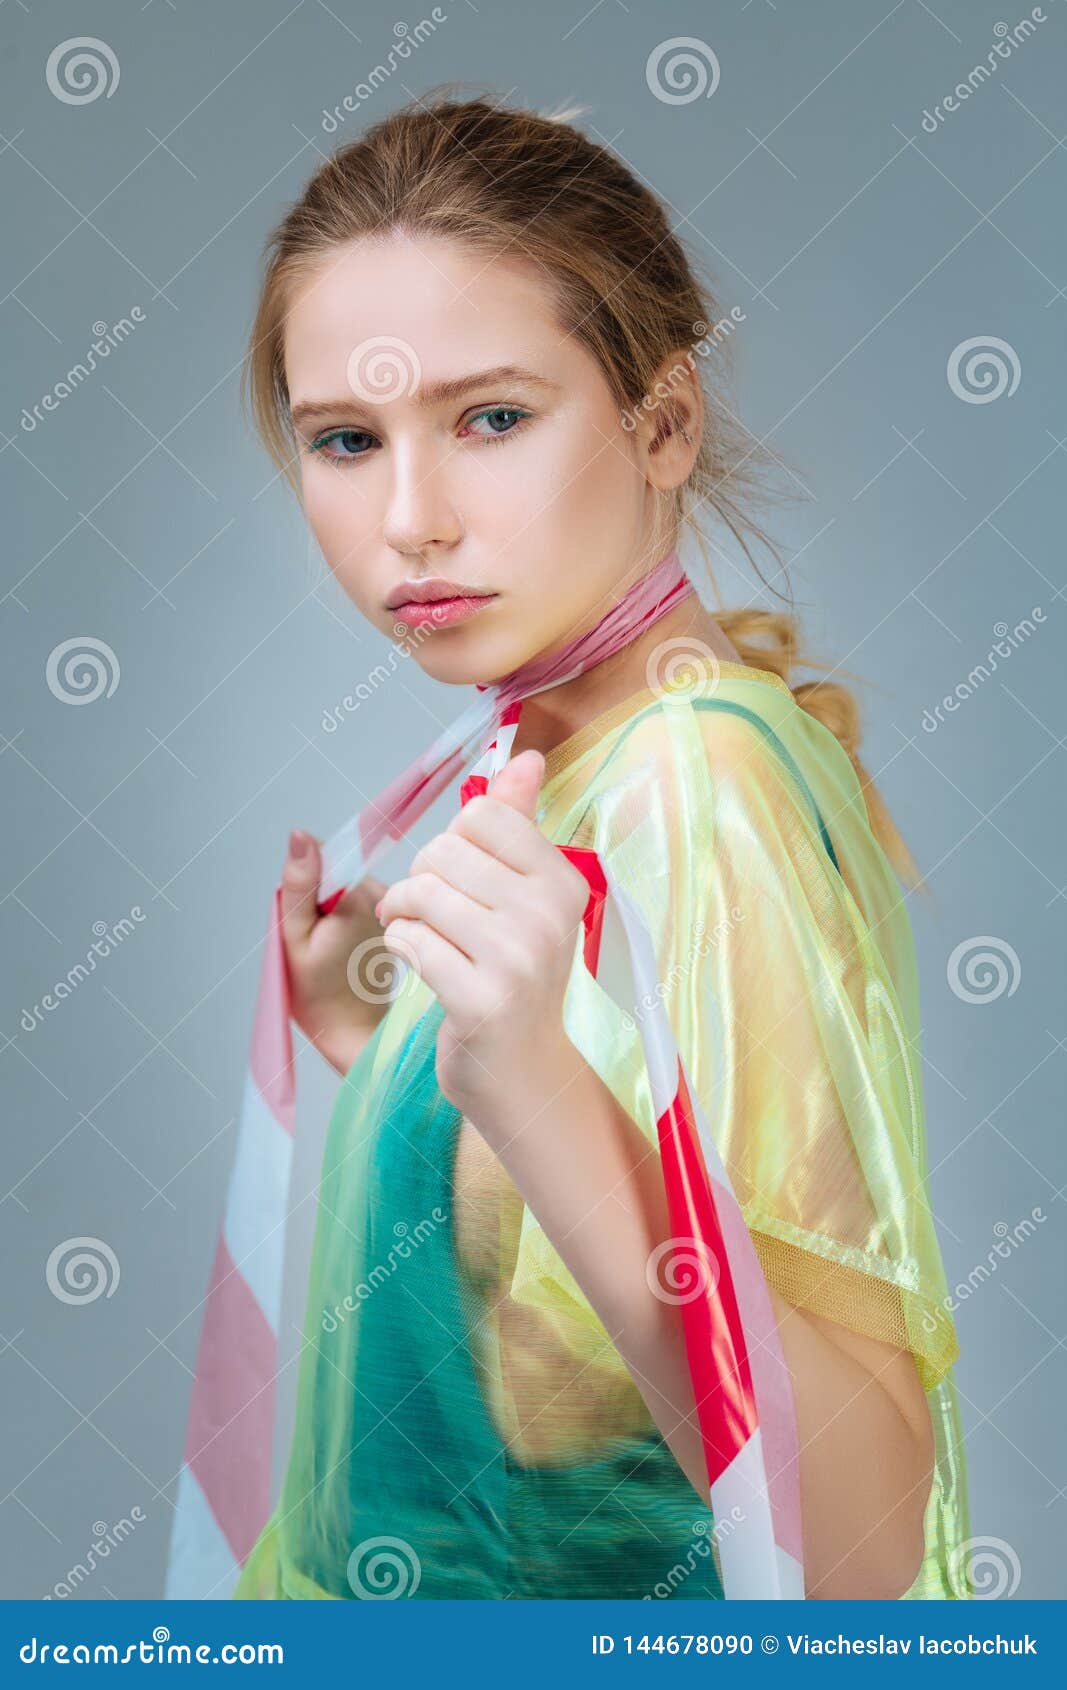 model wearing plastic coat posing with strip on neck